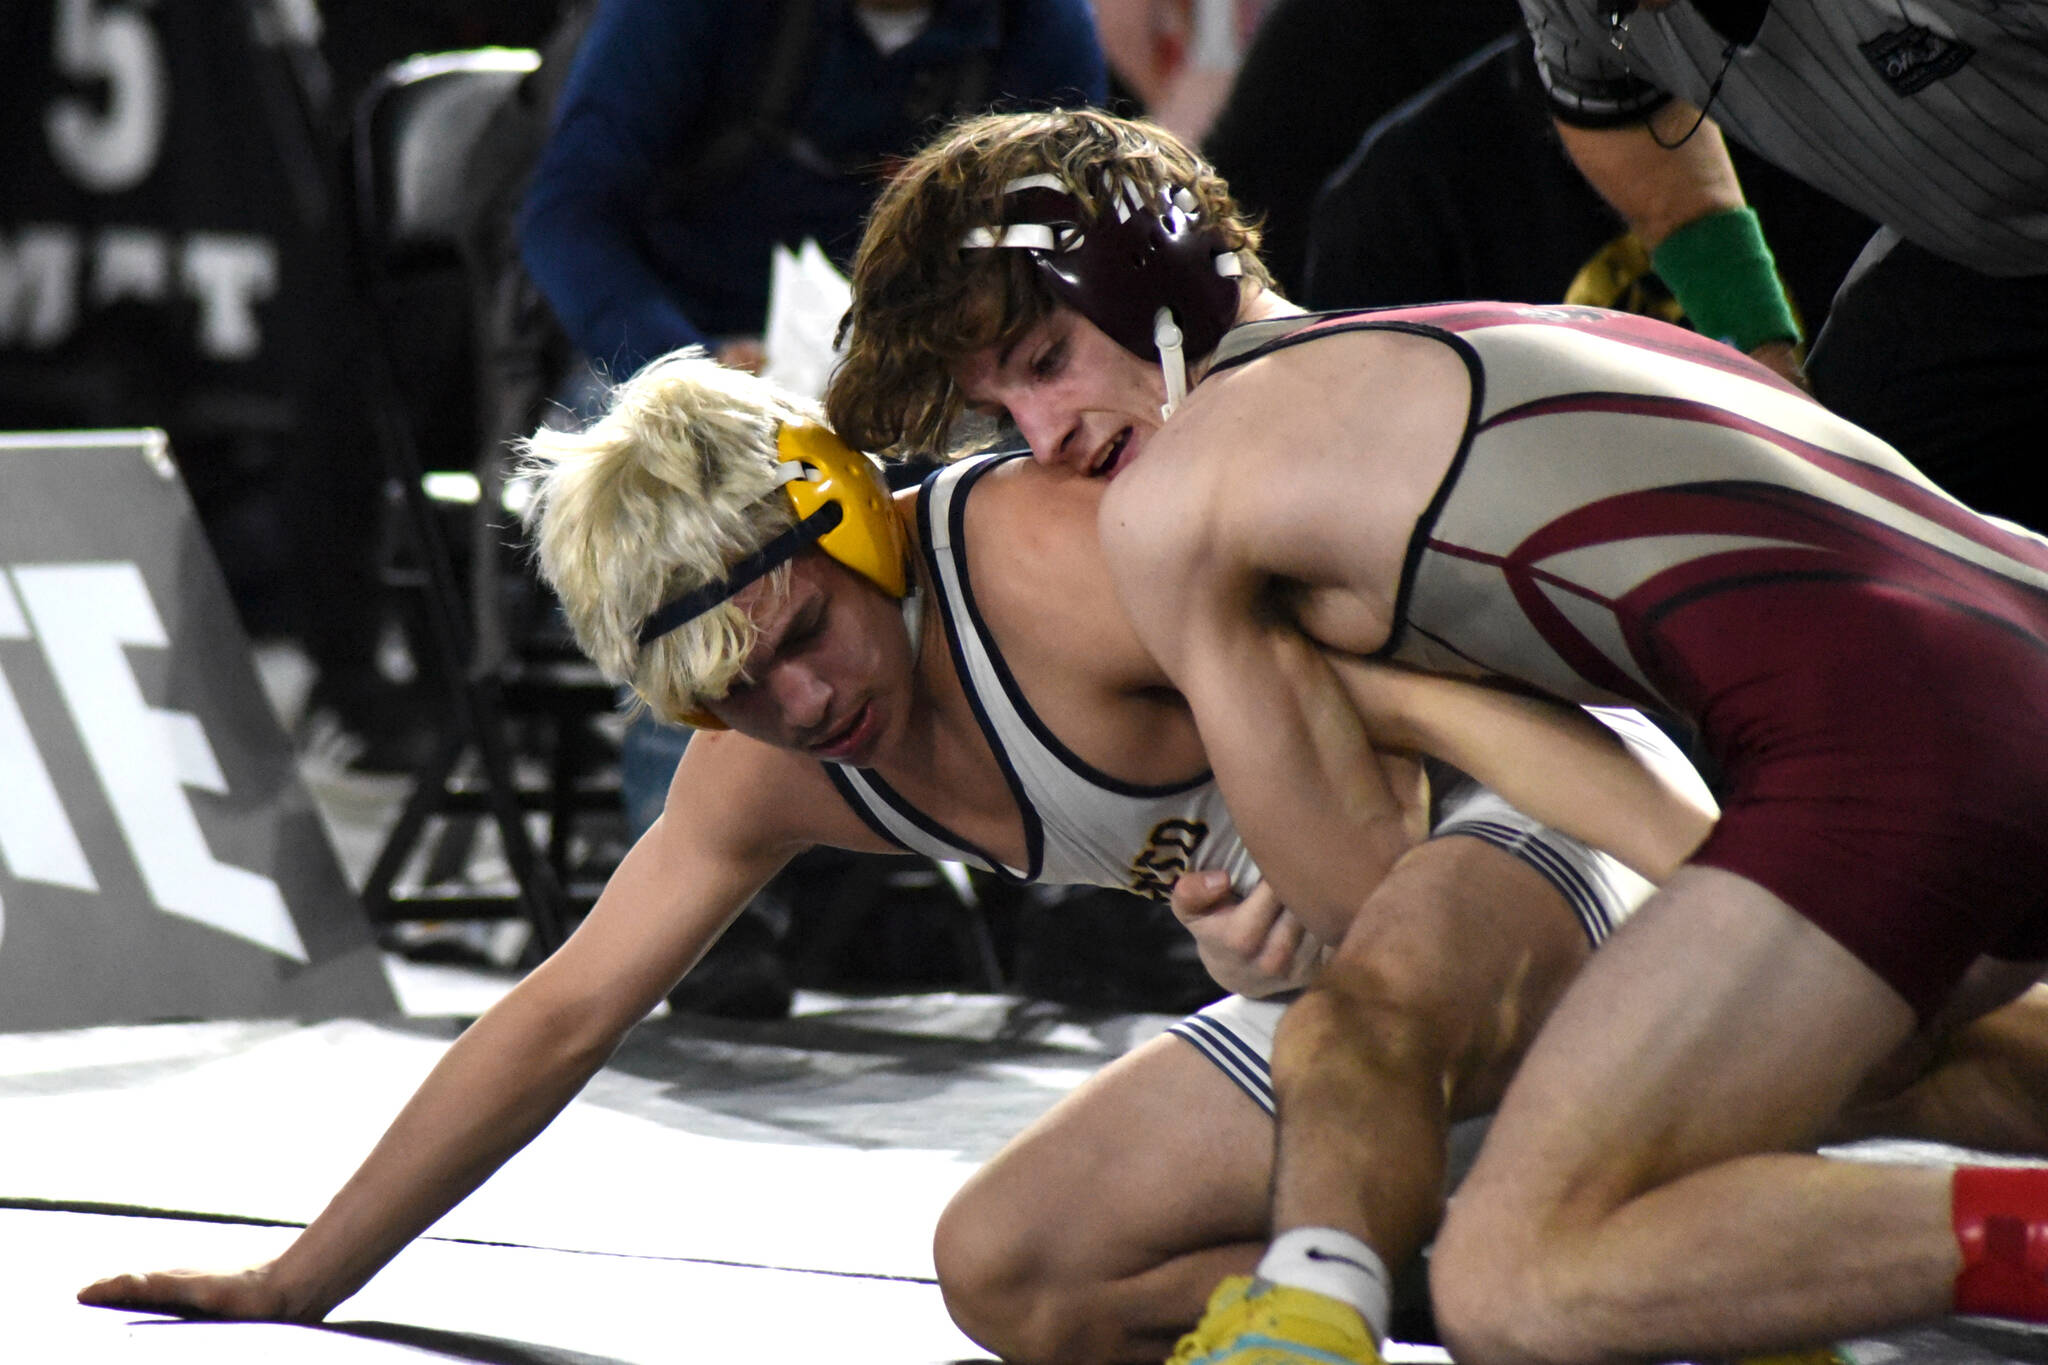 PHOTO BY SUE MICHALAK BUDSBERG Montesano senior Cole Ekerson, right, grapples with Wapato’s Raul Sanchez in a 1A 132-pound semifinal match at the Mat Classic XXXIV state-championship tournament on Saturday at the Tacoma Dome.